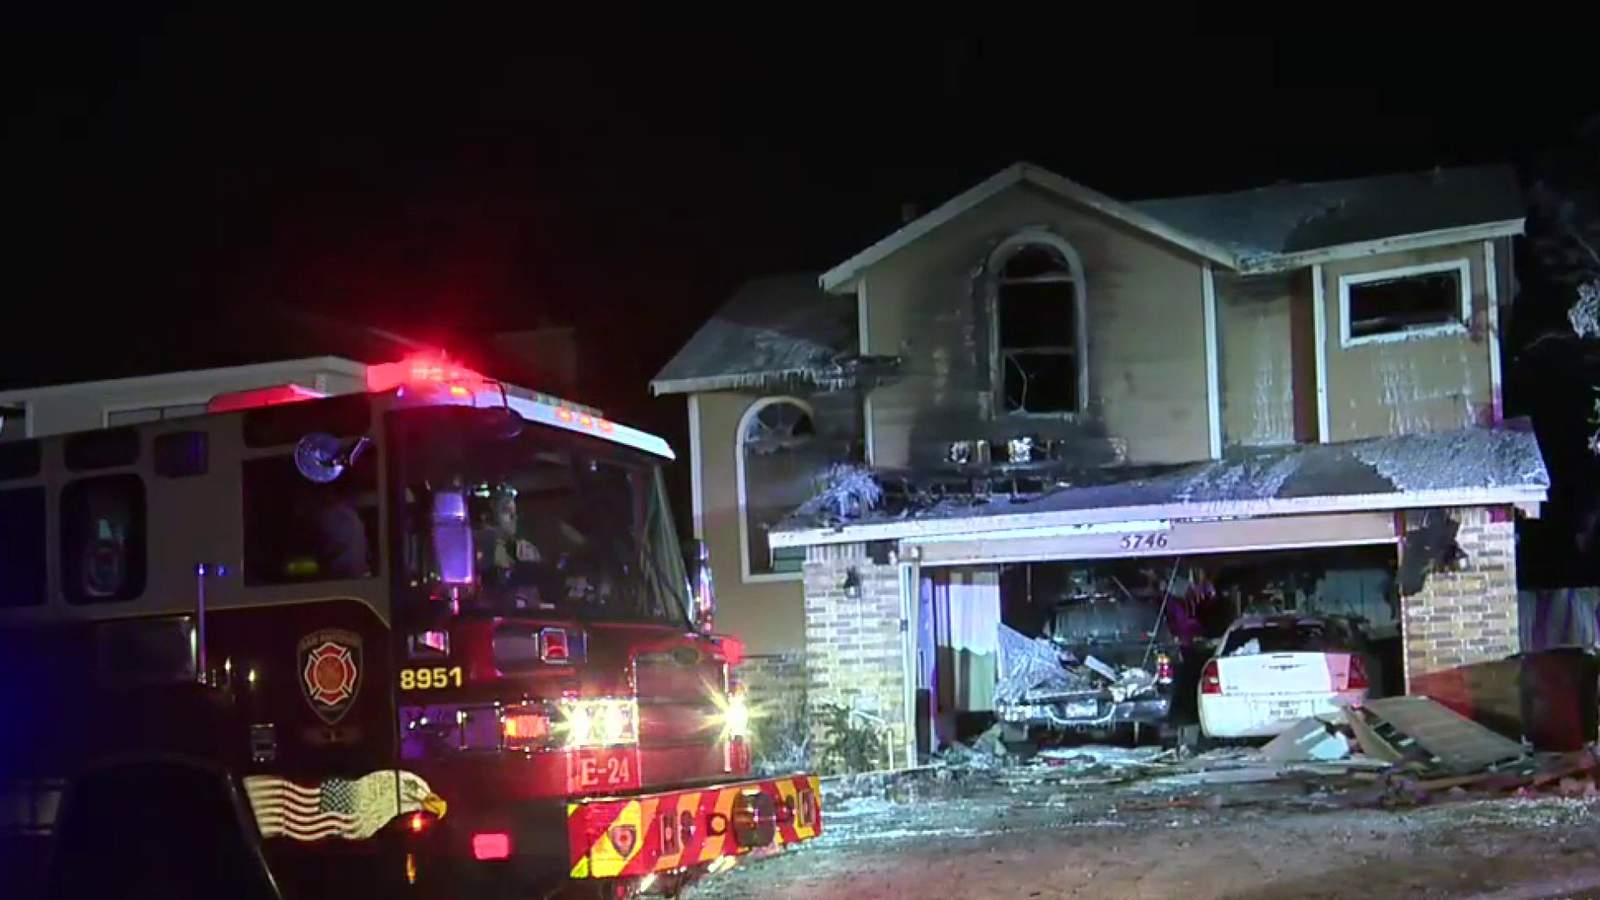 Icy conditions a challenge for San Antonio firefighters responding to fire at Northeast Side home overnight